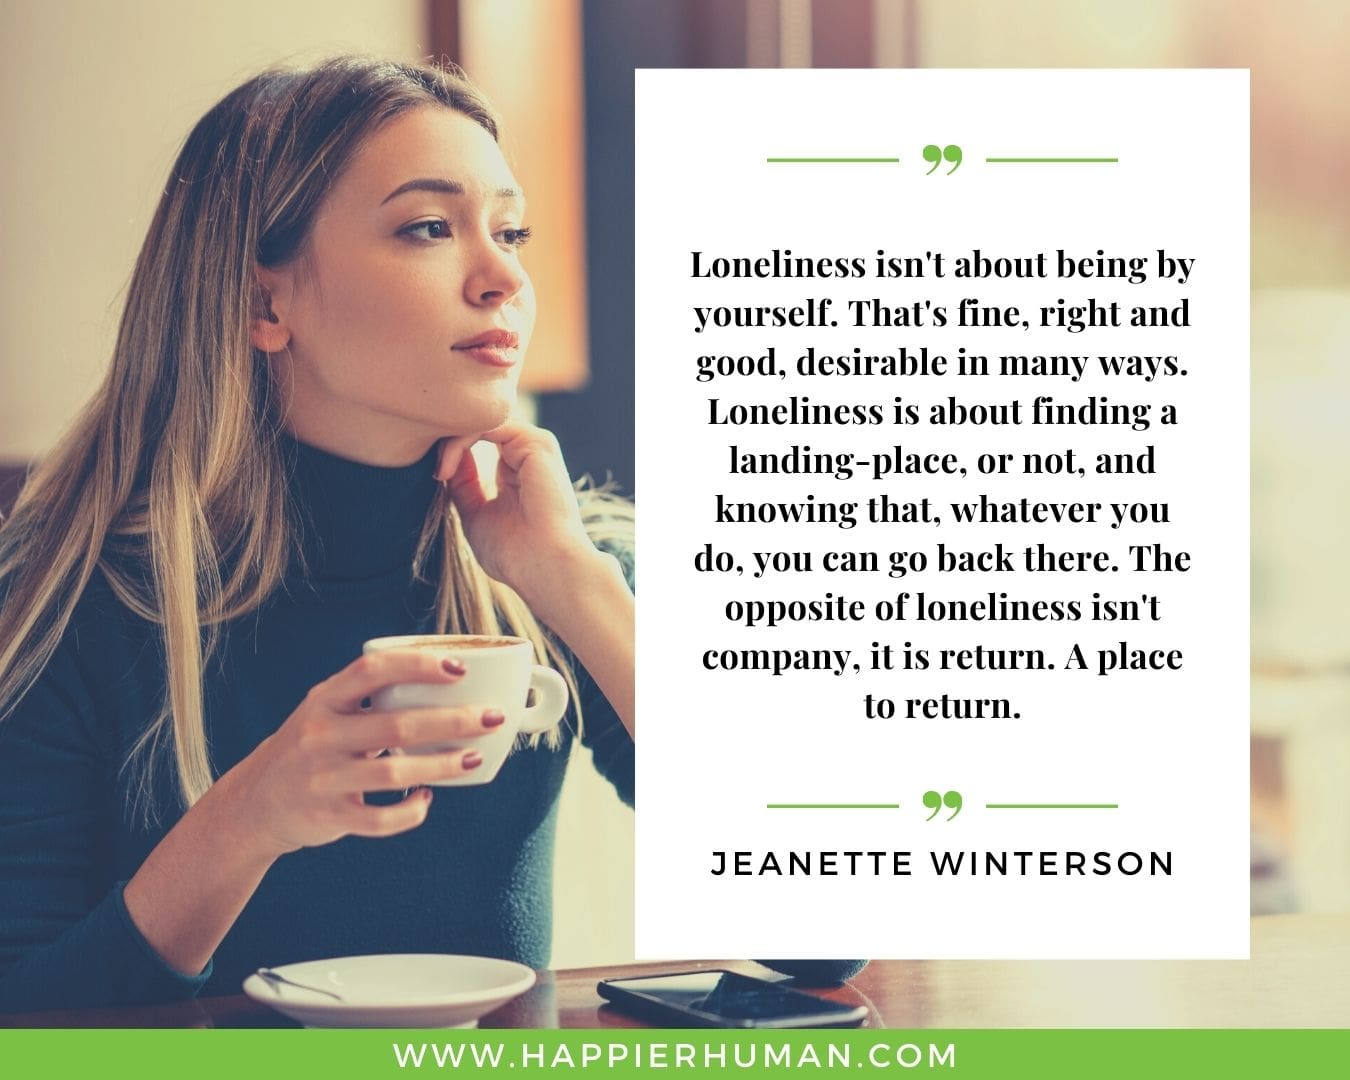 Loneliness Quotes - “Loneliness isn't about being by yourself. That's fine, right and good, desirable in many ways. Loneliness is about finding a landing-place, or not, and knowing that, whatever you do, you can go back there. The opposite of loneliness isn't company, it is return. A place to return.”– Jeanette Winterson